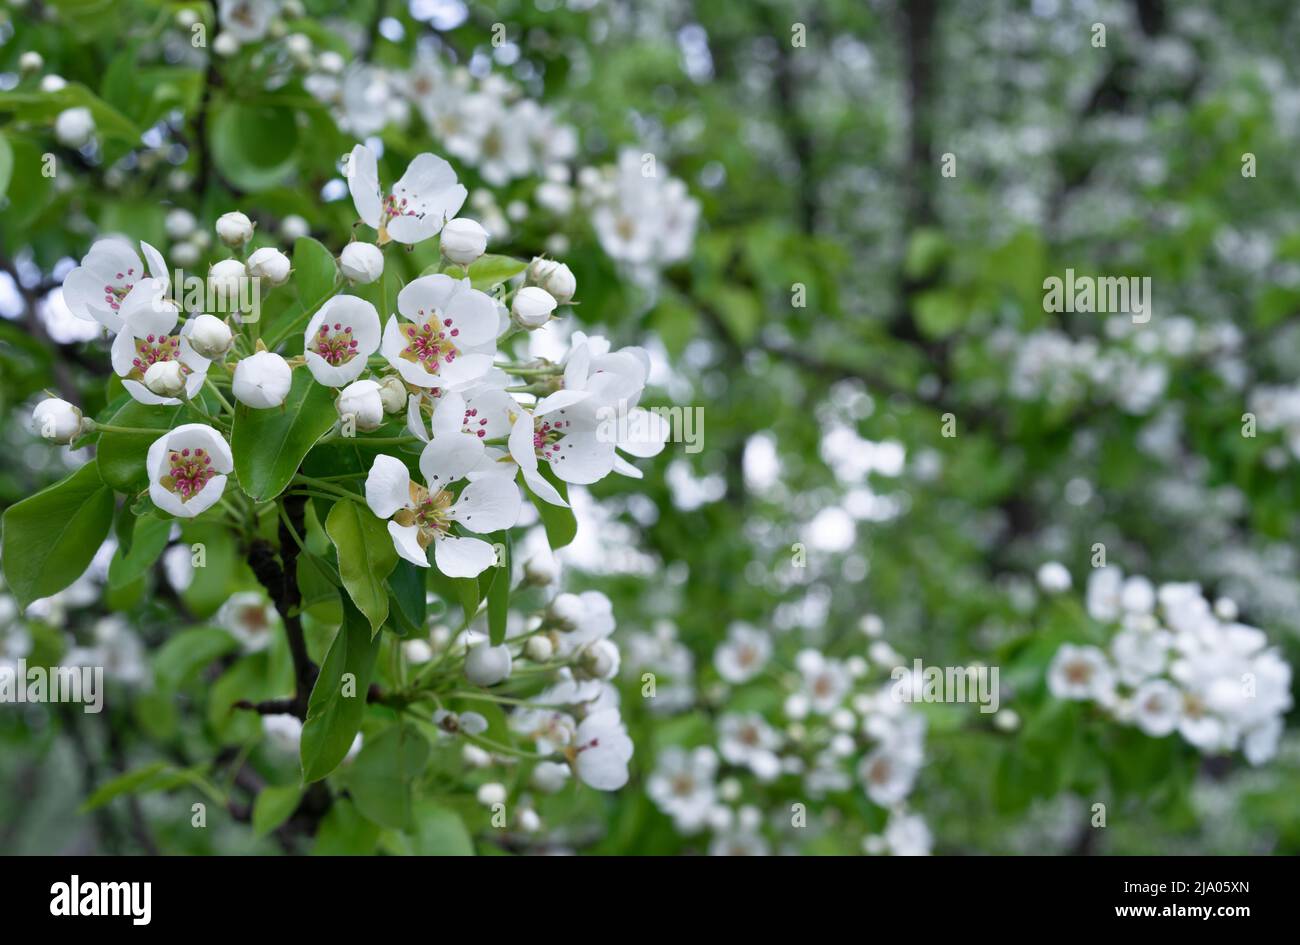 Blooming pear in the spring garden. White pear flowers with pink stamens. Stock Photo